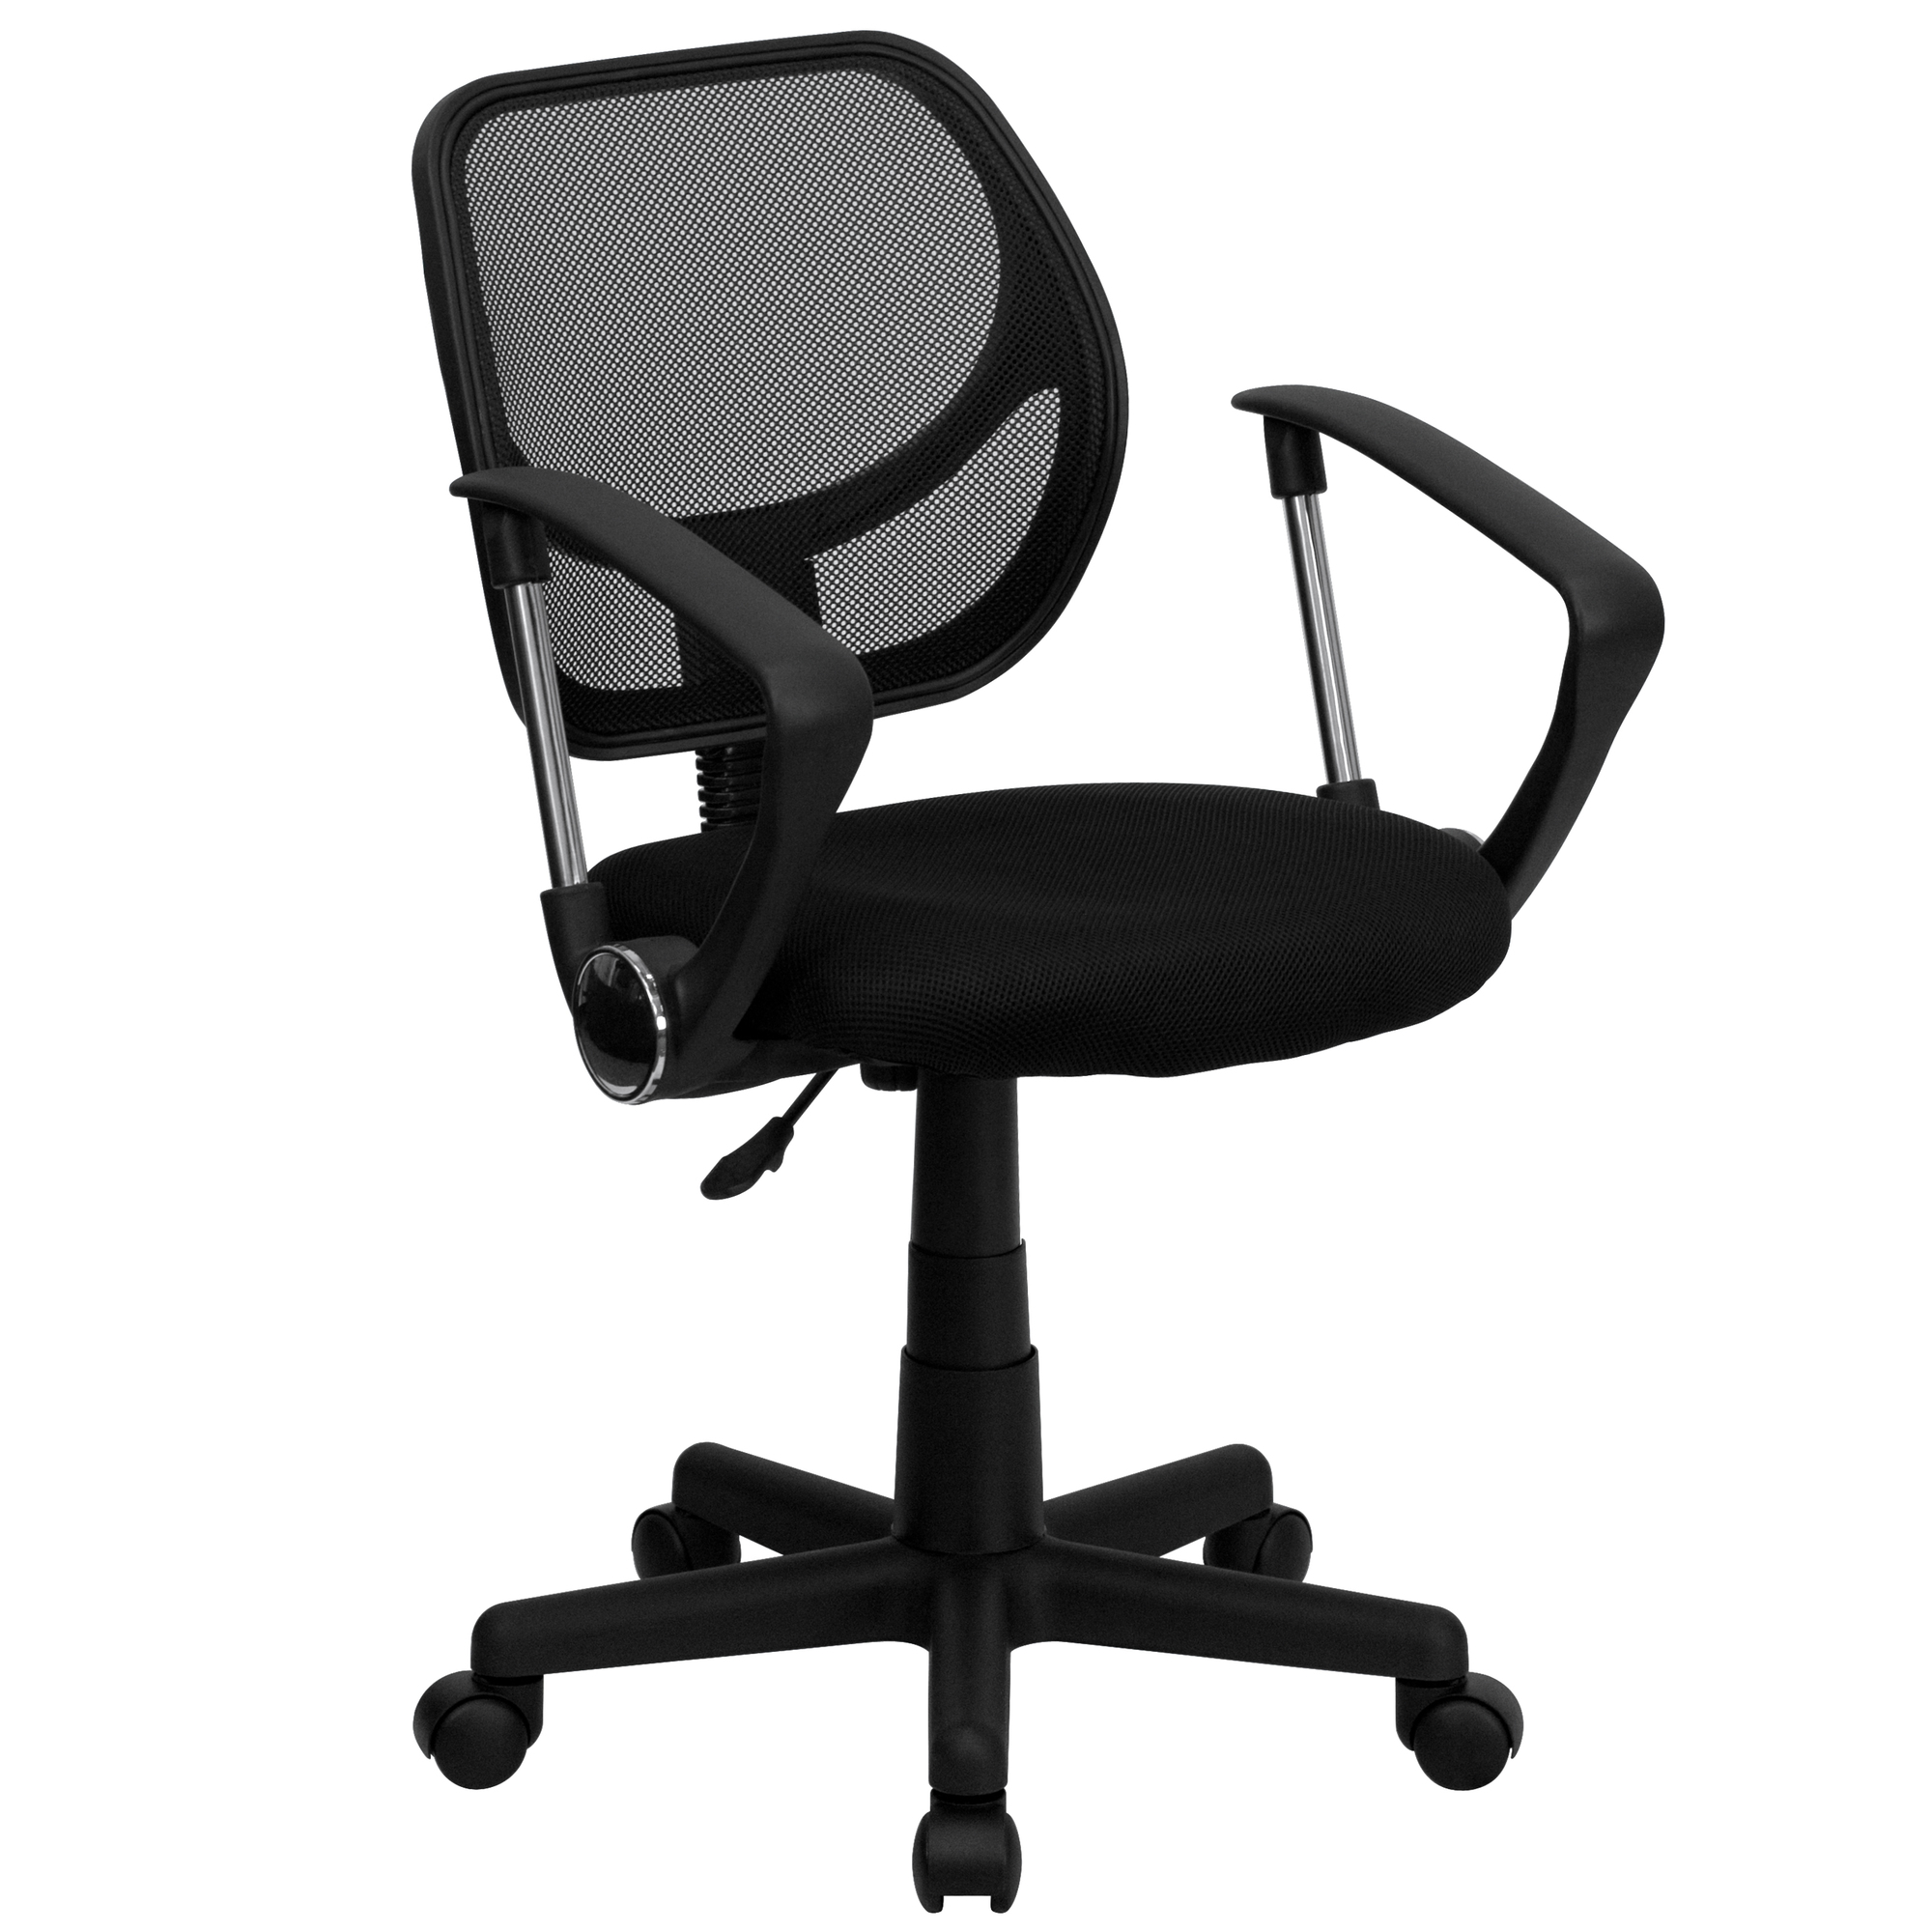 Low Back Black Mesh Swivel Task Chair with Arms, Primary Color Black, Included (qty.) 1, Model - Flash Furniture WA3074BKARM